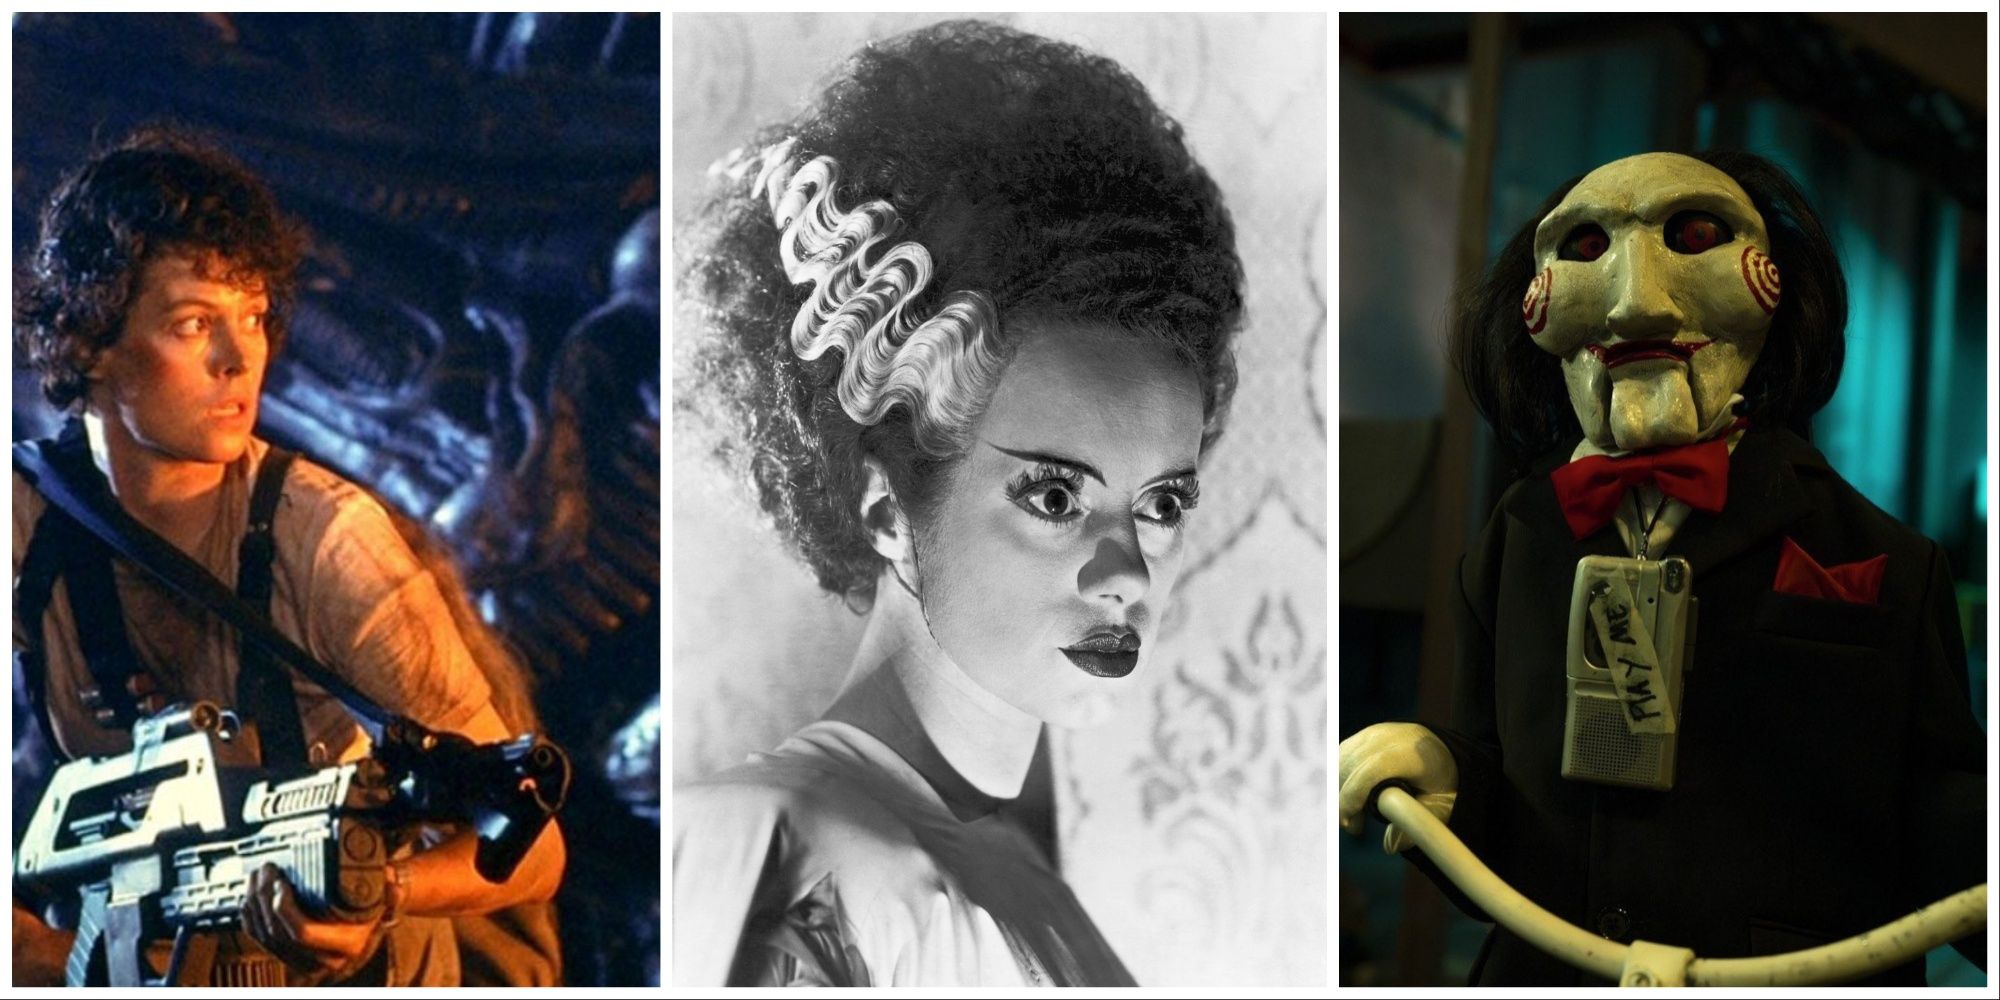 Collage image of Ellen Ripley from Aliens, The Bride of Frankenstein and Billy the Puppet from Saw.